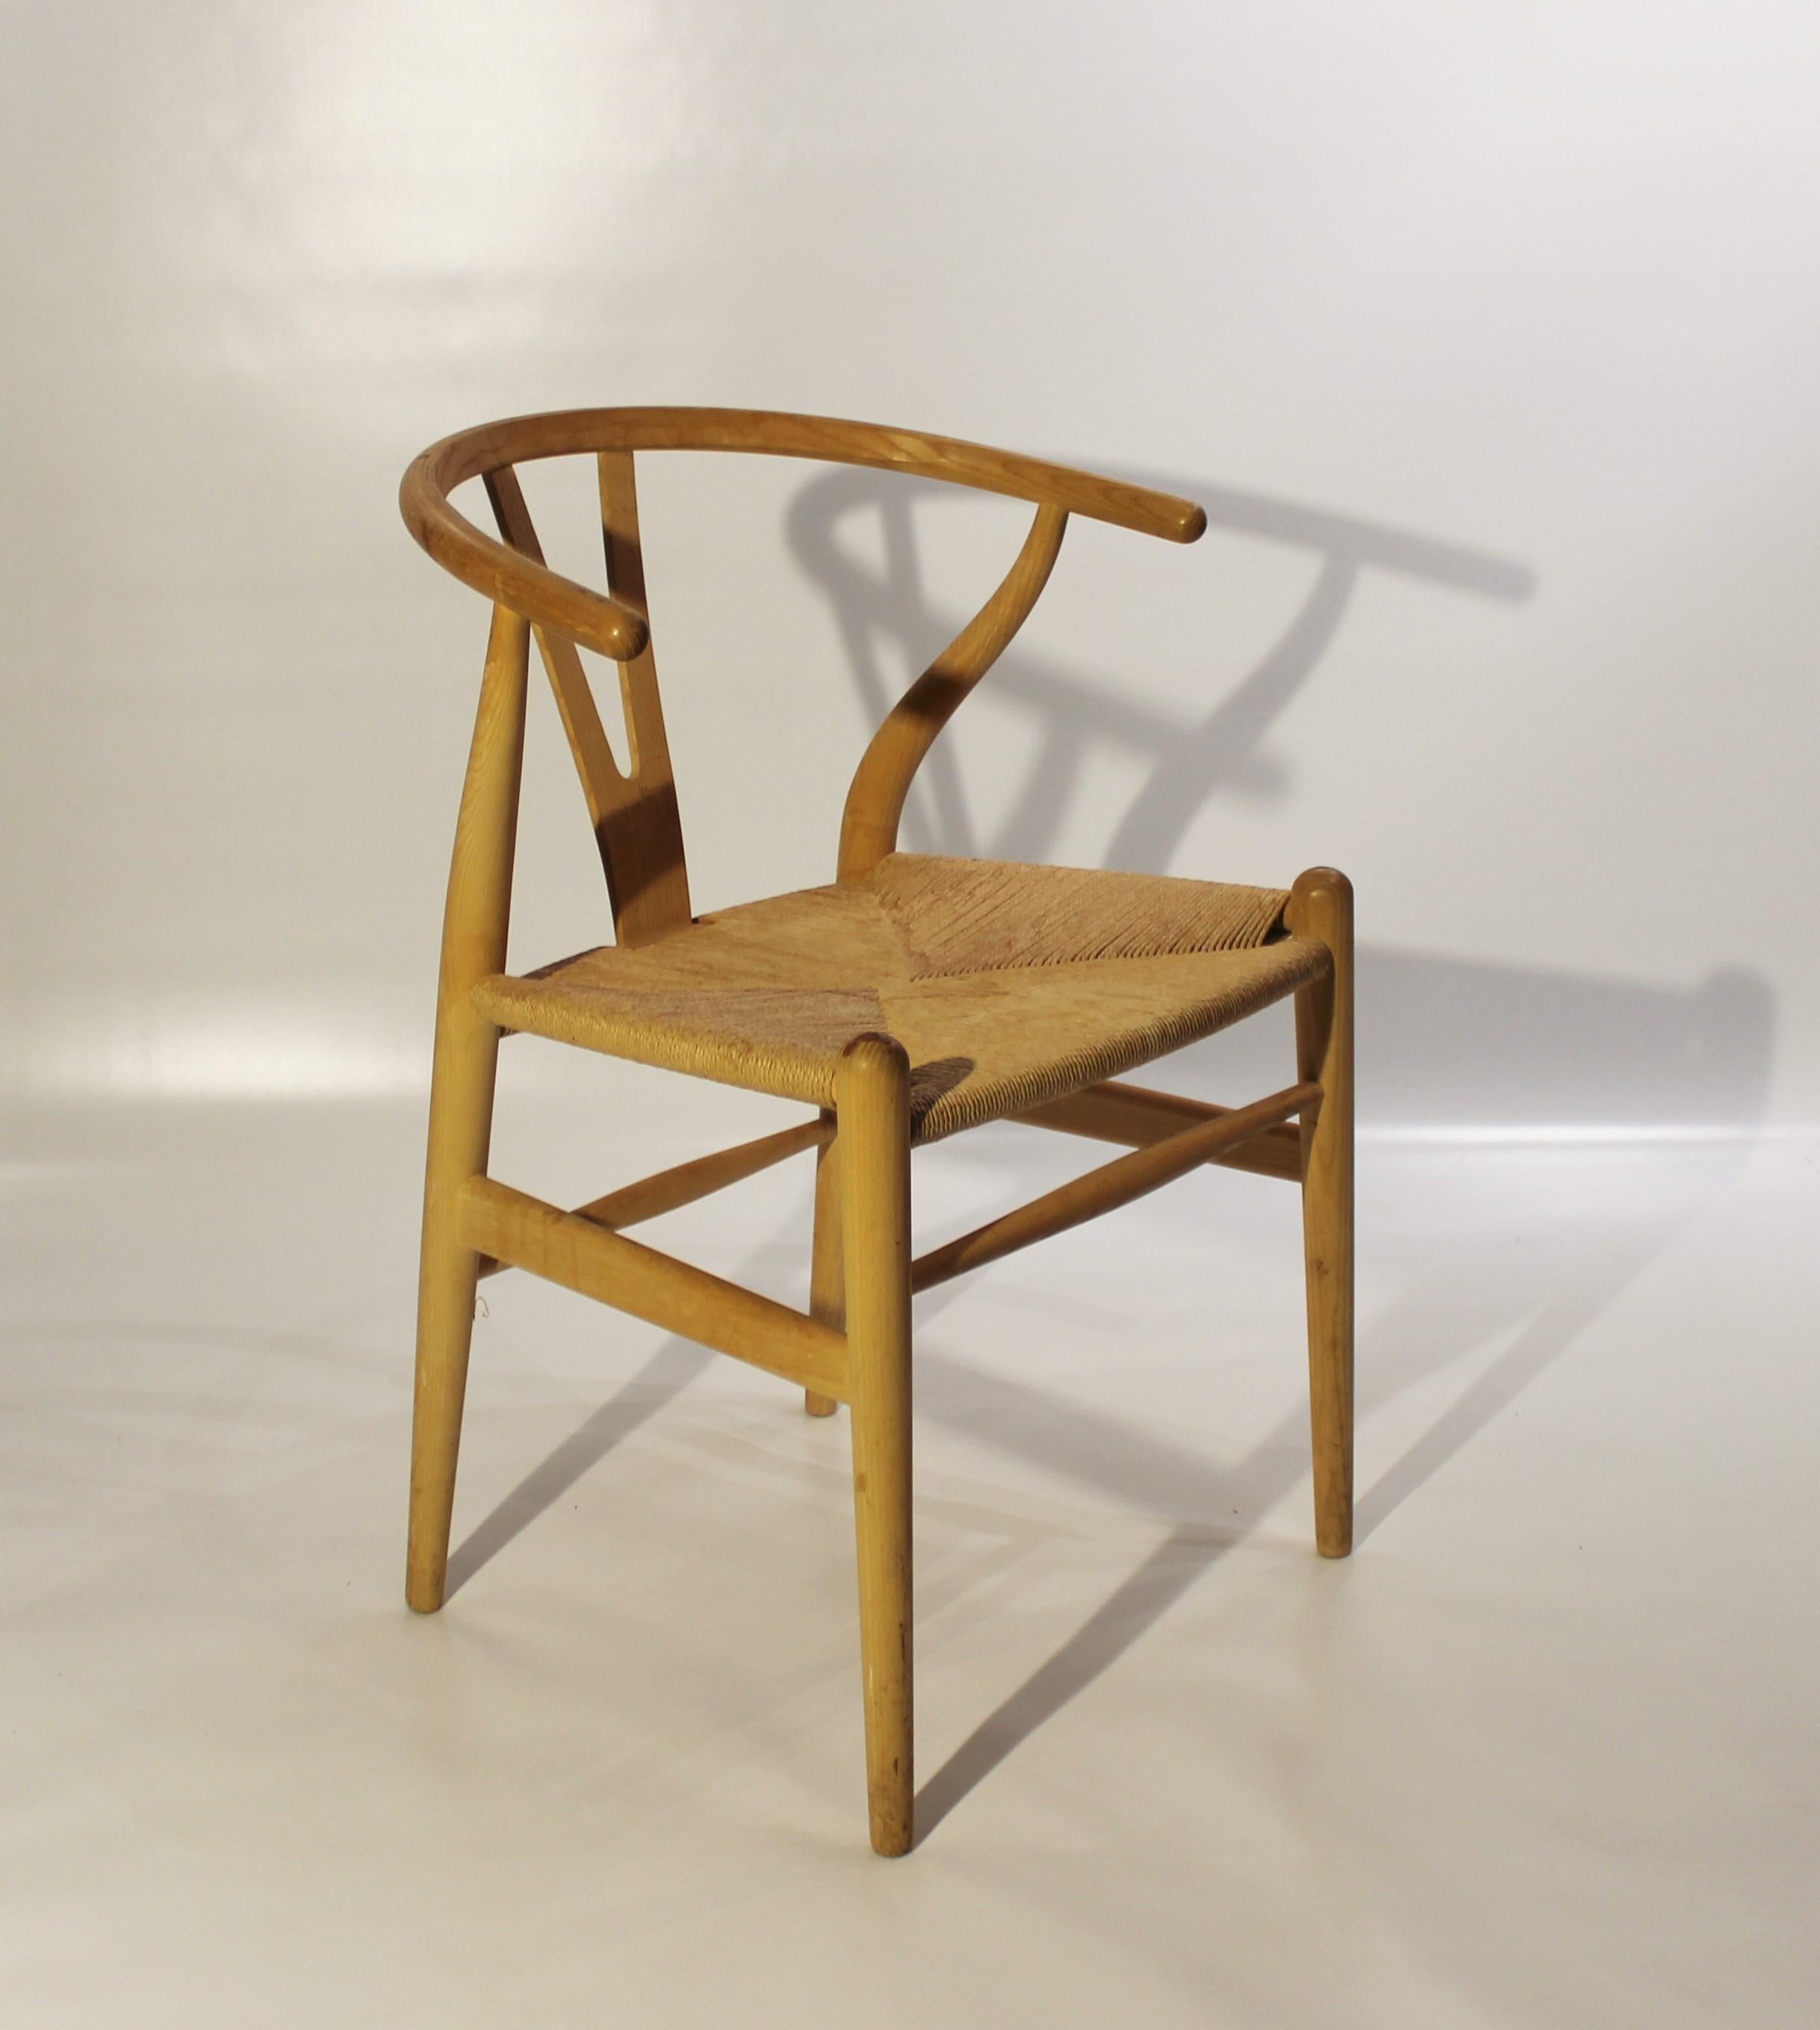 Wishbone chair, model CH24, designed by Hans J. Wegner in 1950 and manufactured by Carl Hansen & Son. The chair is with a paper cord seat and ash.